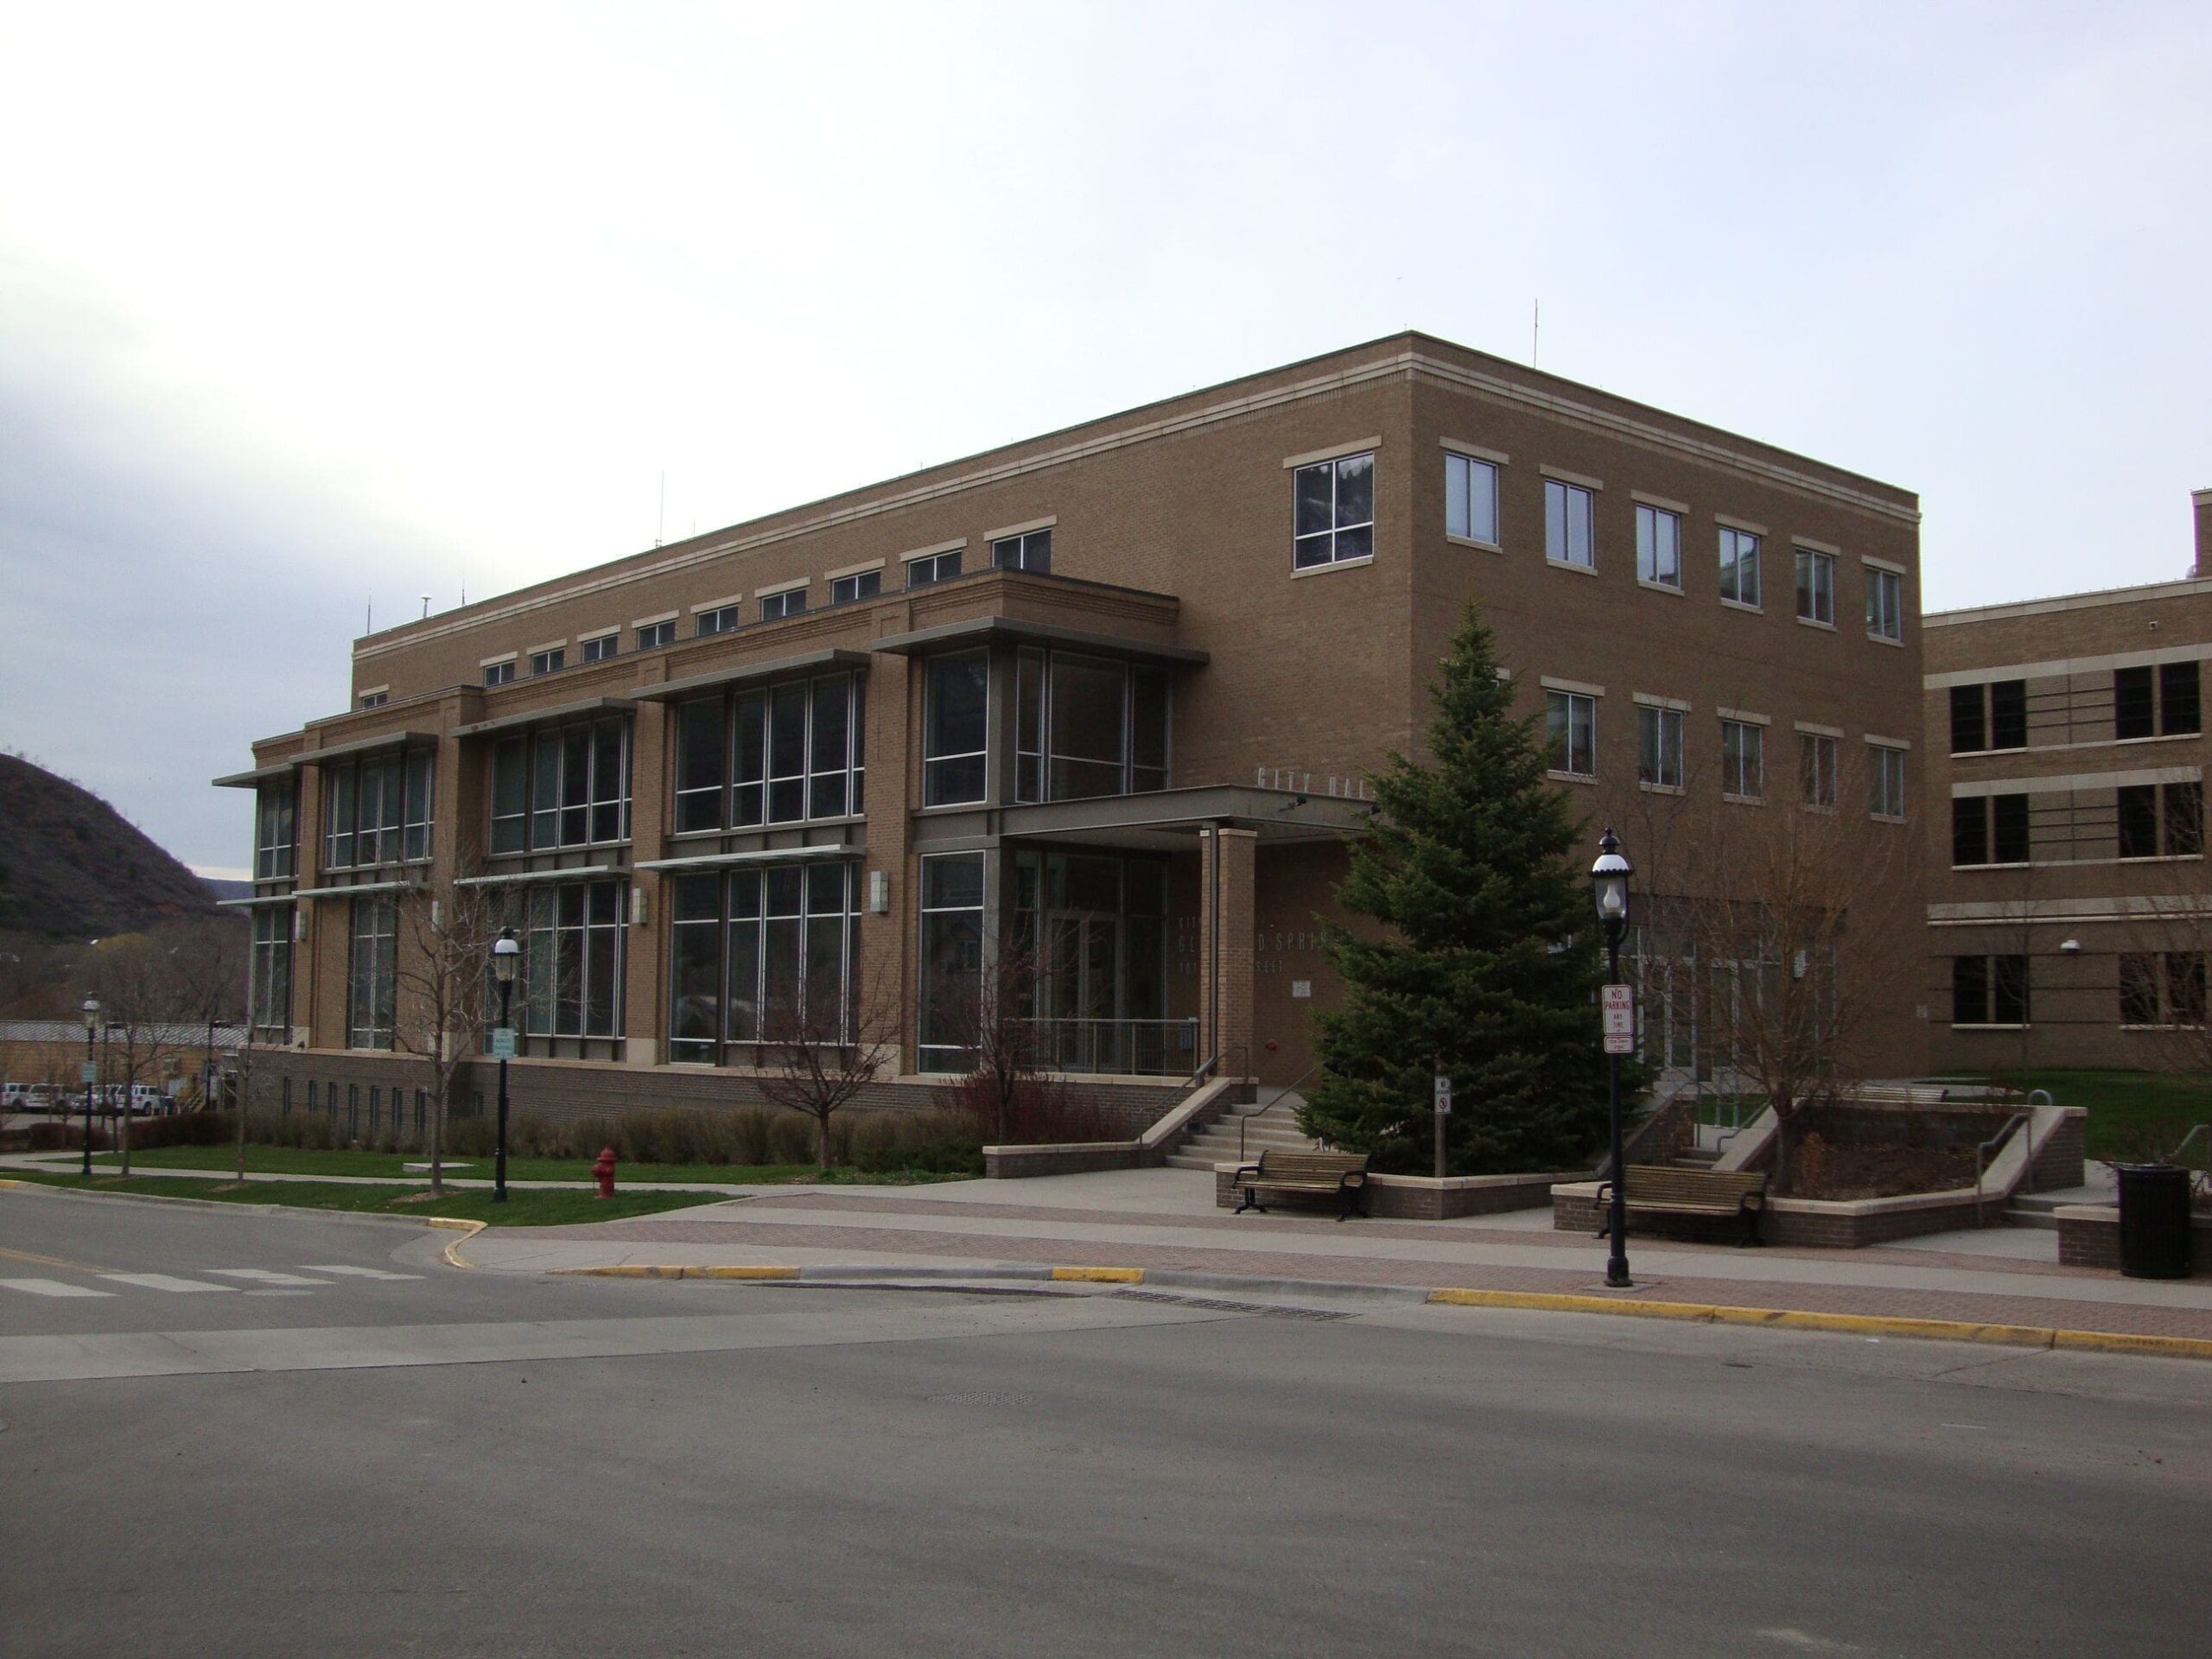 Wide angle view of a brown government building.